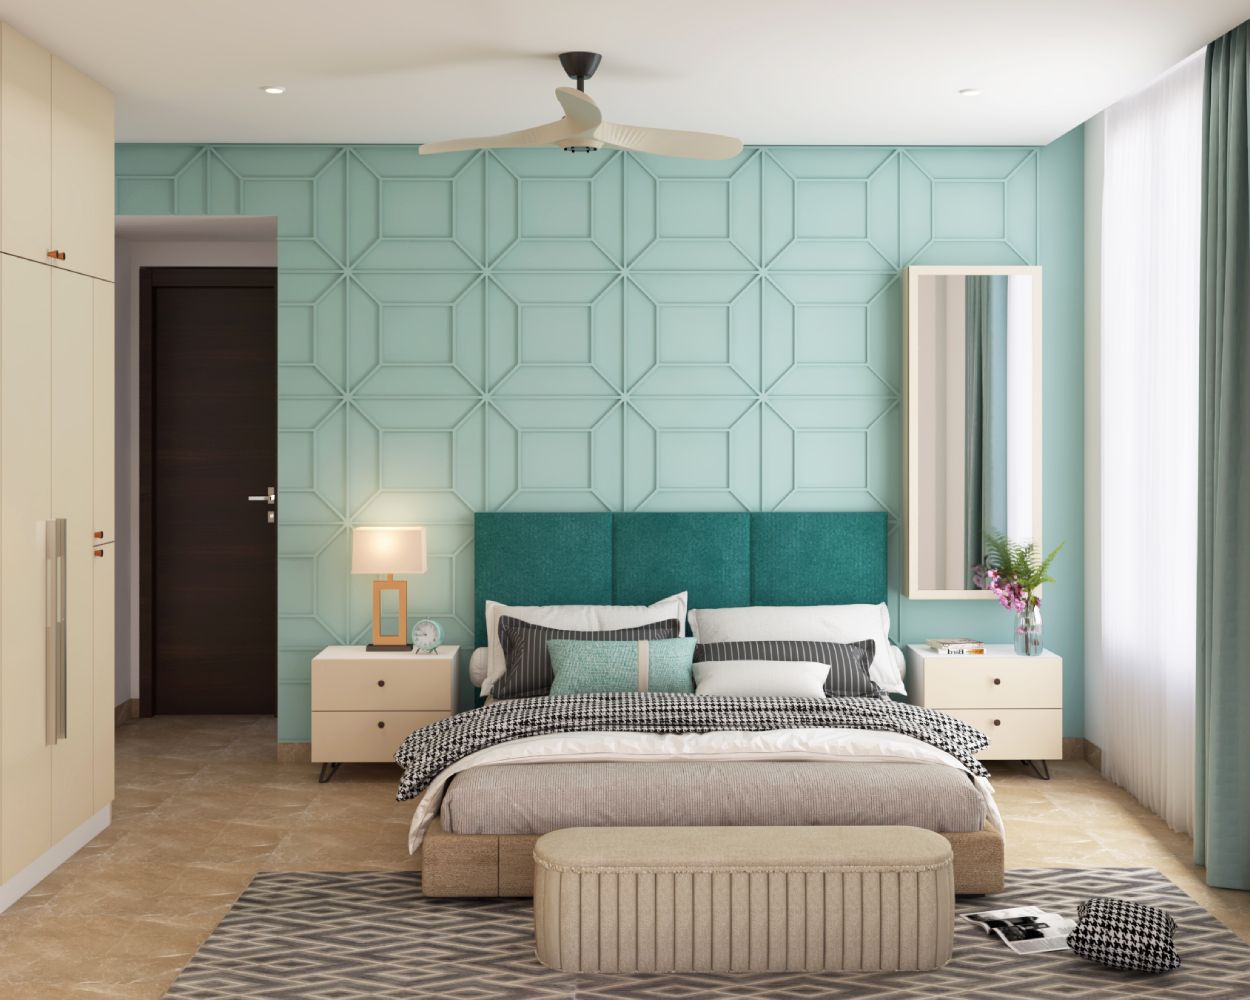 Contemporary Kids Room Design For Girls With Sea-Green Accent Wall And Geometric Wall Paneling